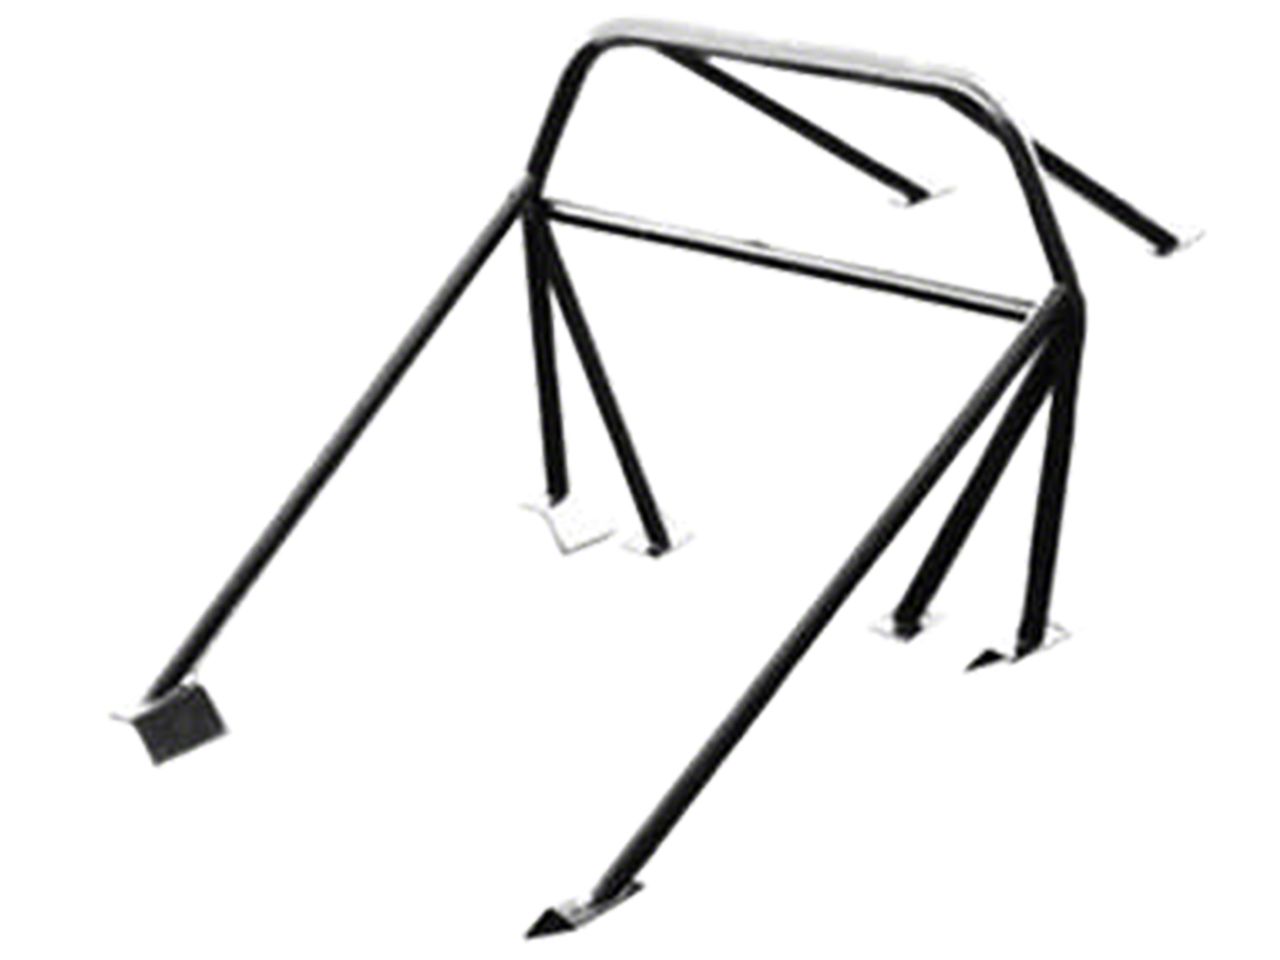 Camaro Roll Bars & Roll Cages 1970-1981